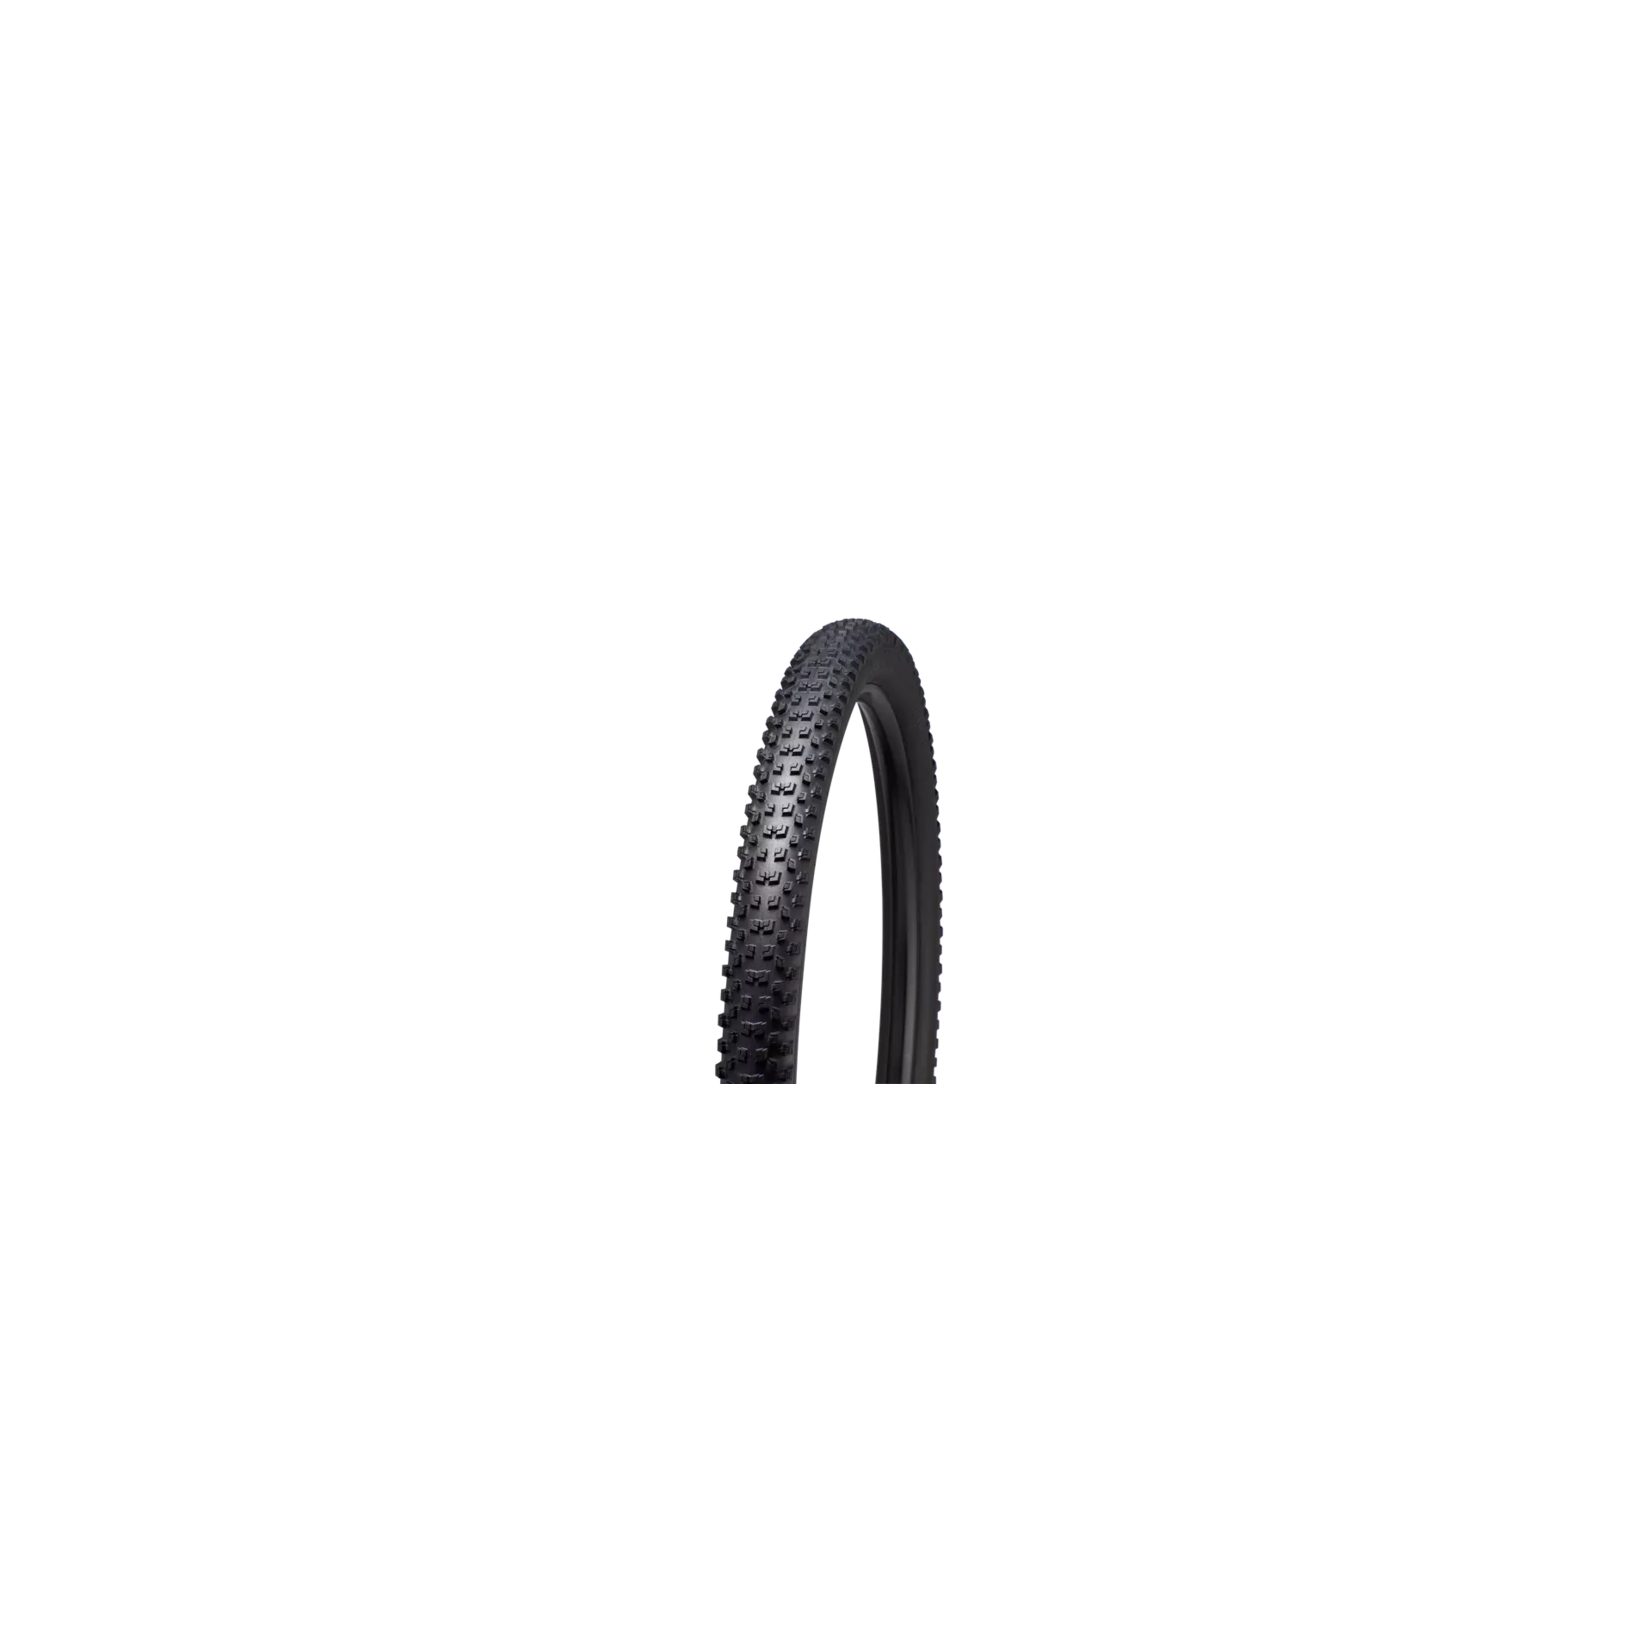 Specialized Secialized Ground Control 27.5x2.35 Folding Bead Tubeless Ready Mountain Tire Black